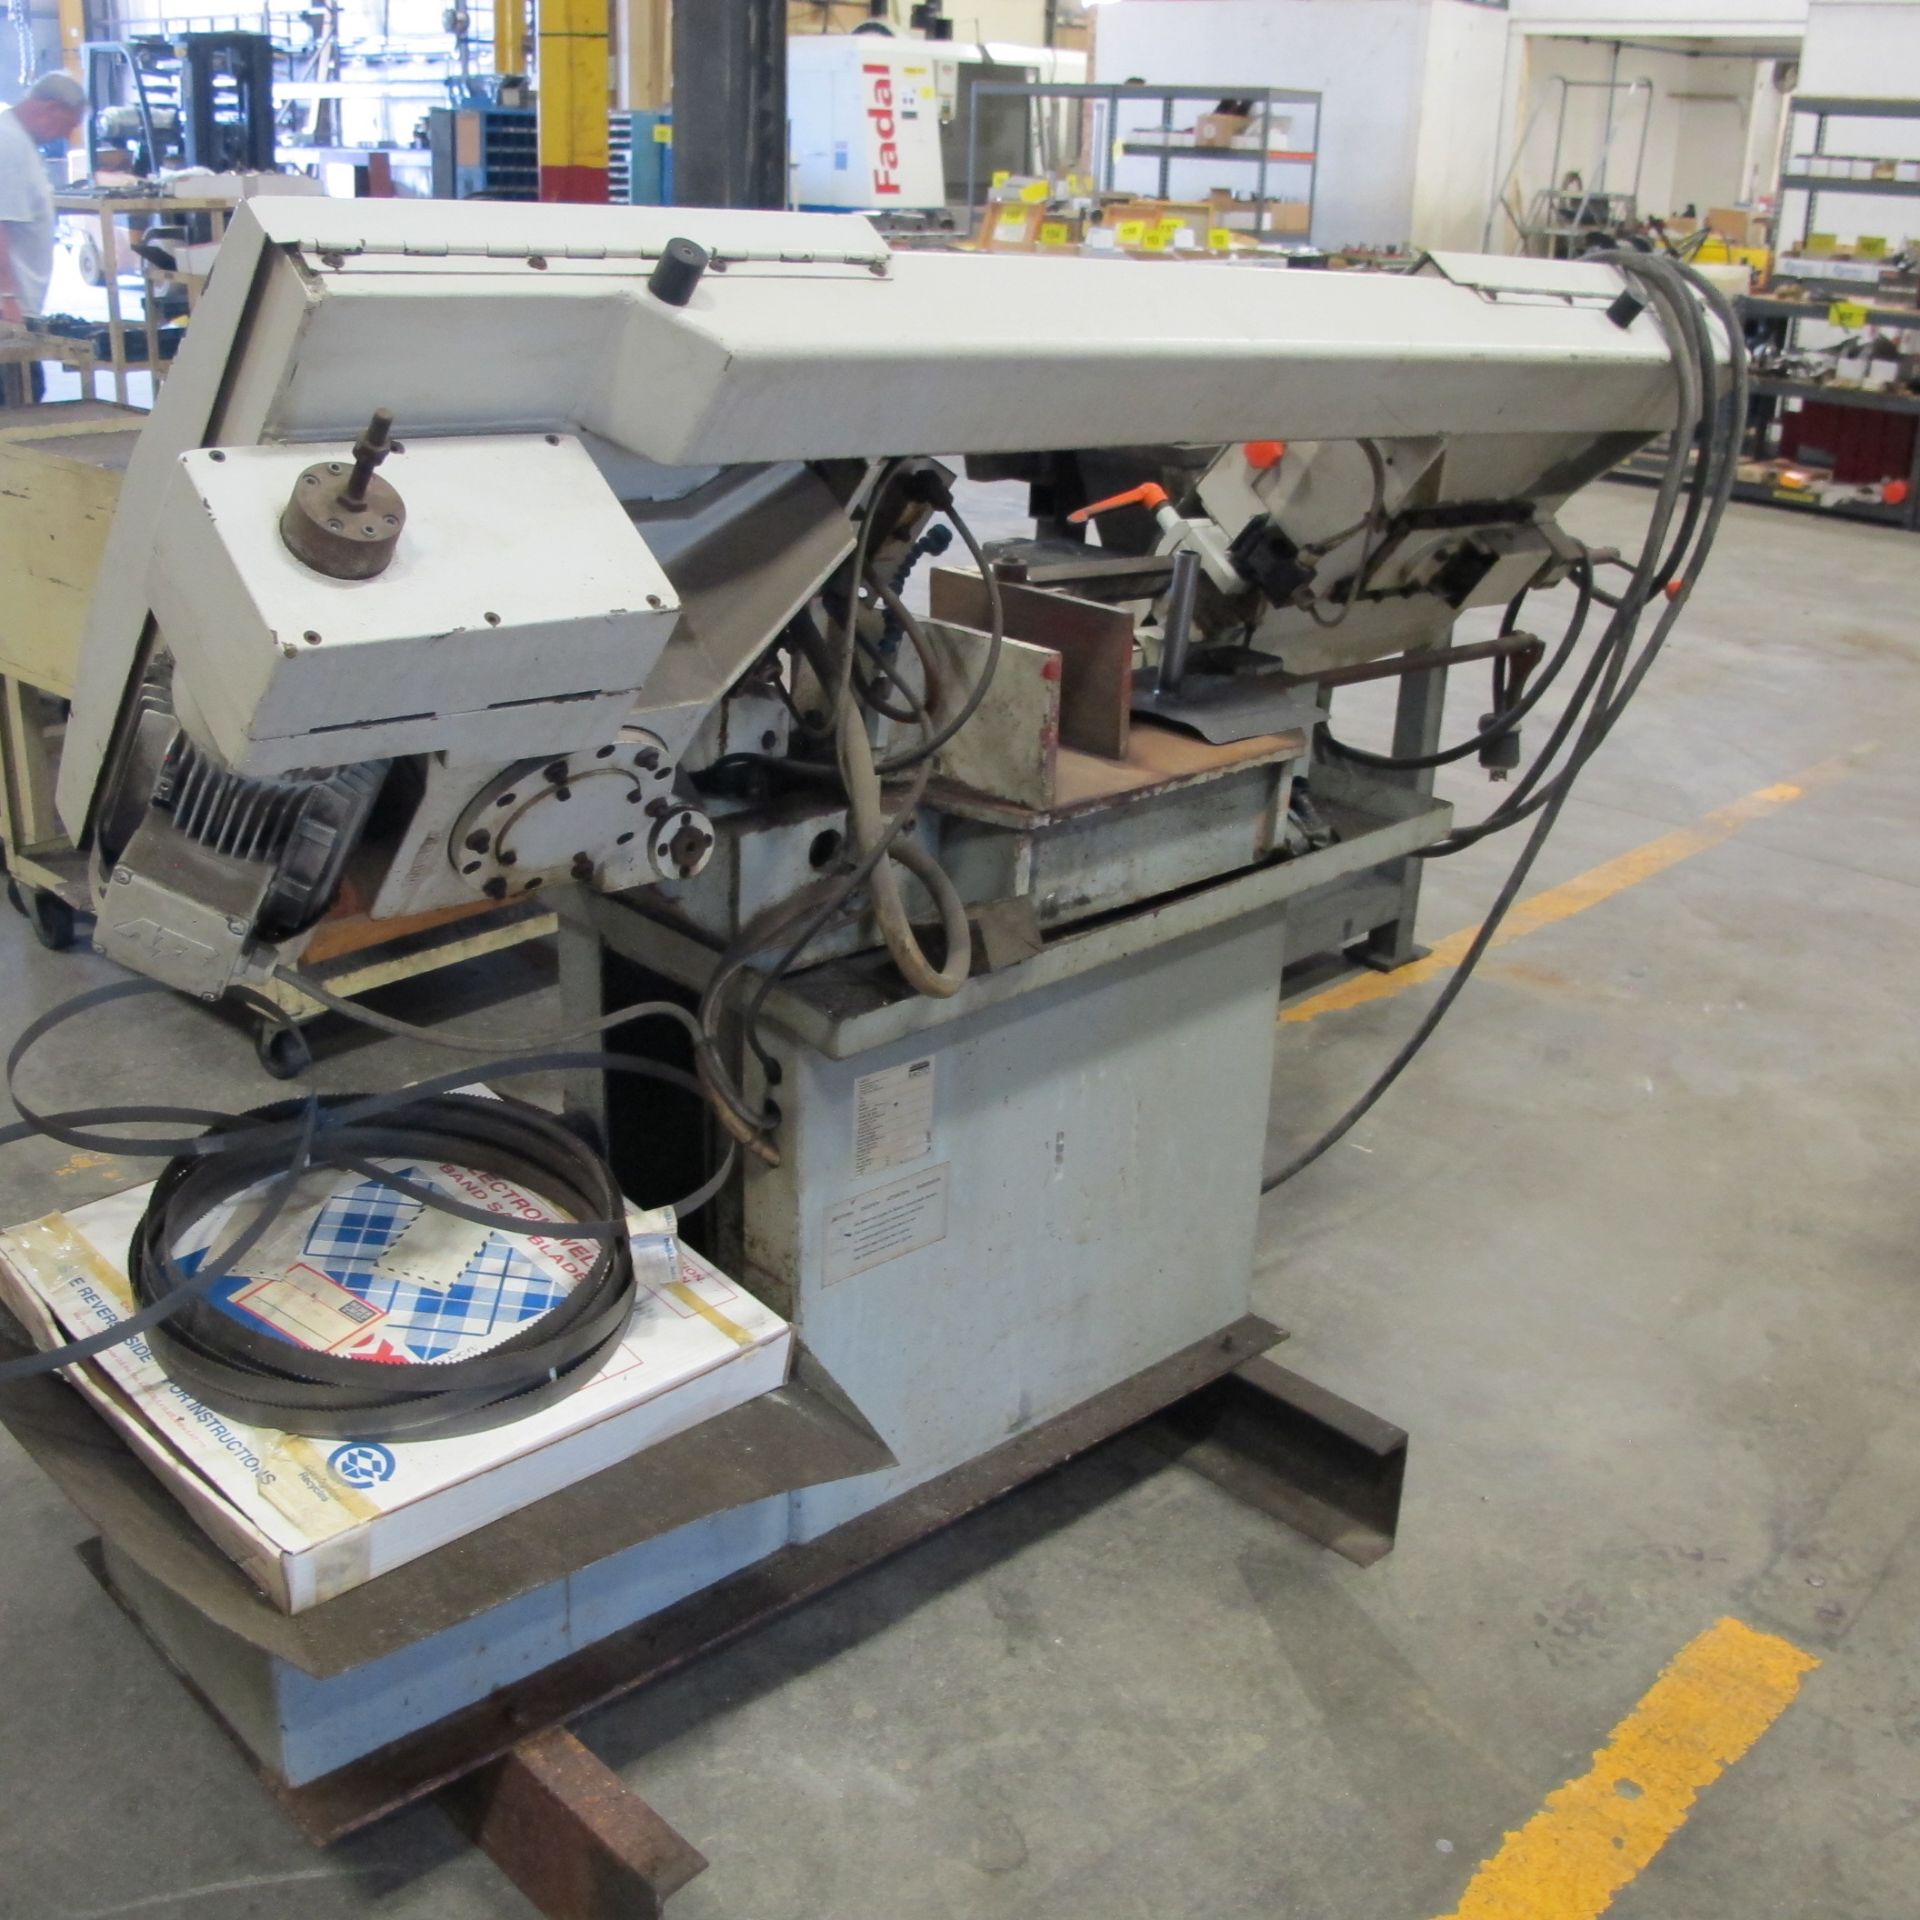 KASTO SBL 280U HORIZONTAL BANDSAW W/ CLAMPING AND EXTRA BLADES - Image 2 of 4